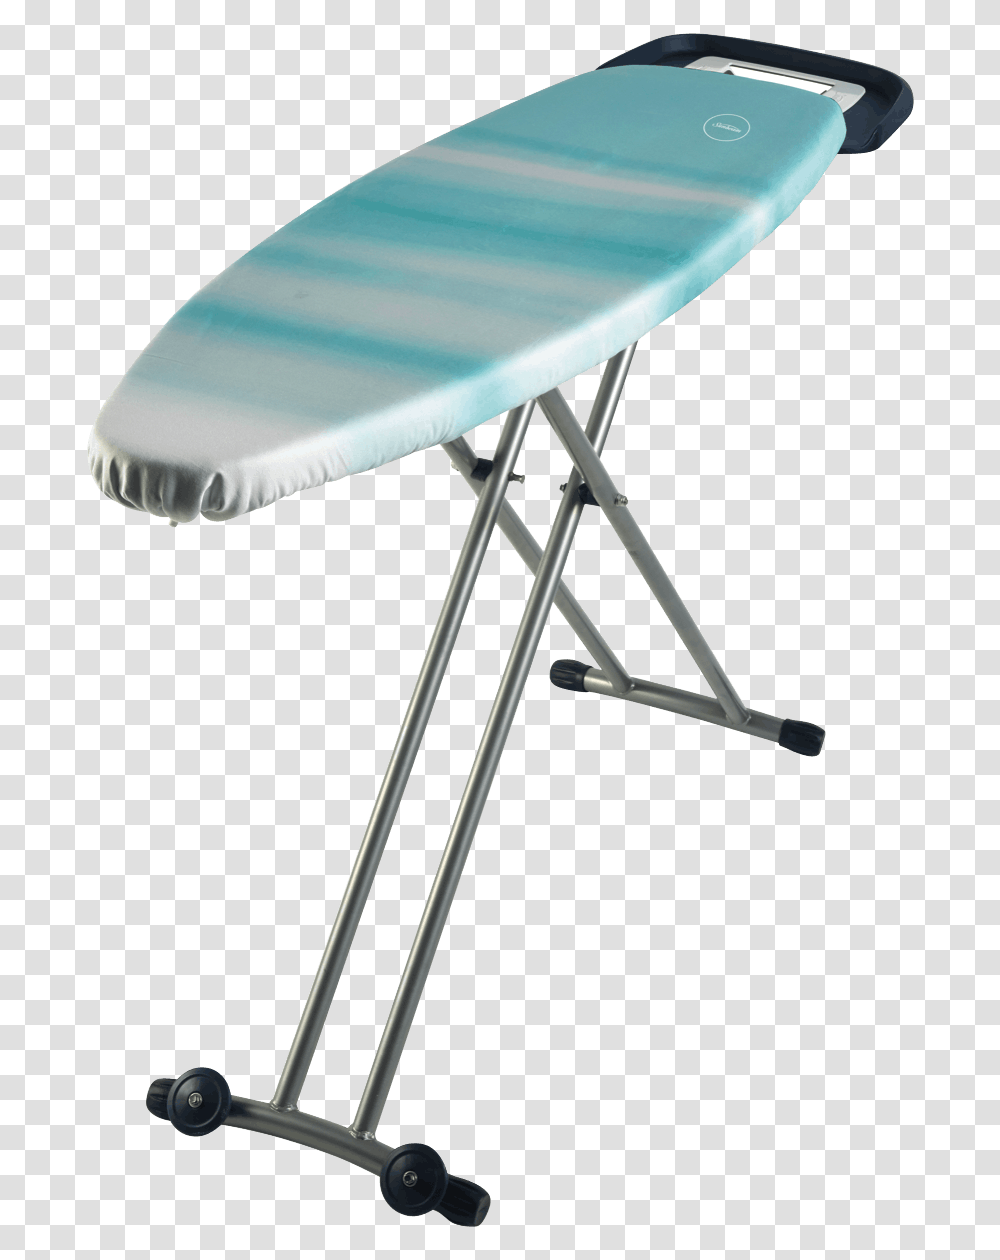 Sunbeam Sb7400 Chic Ironing Board, Furniture, Table, Chair, Utility Pole Transparent Png